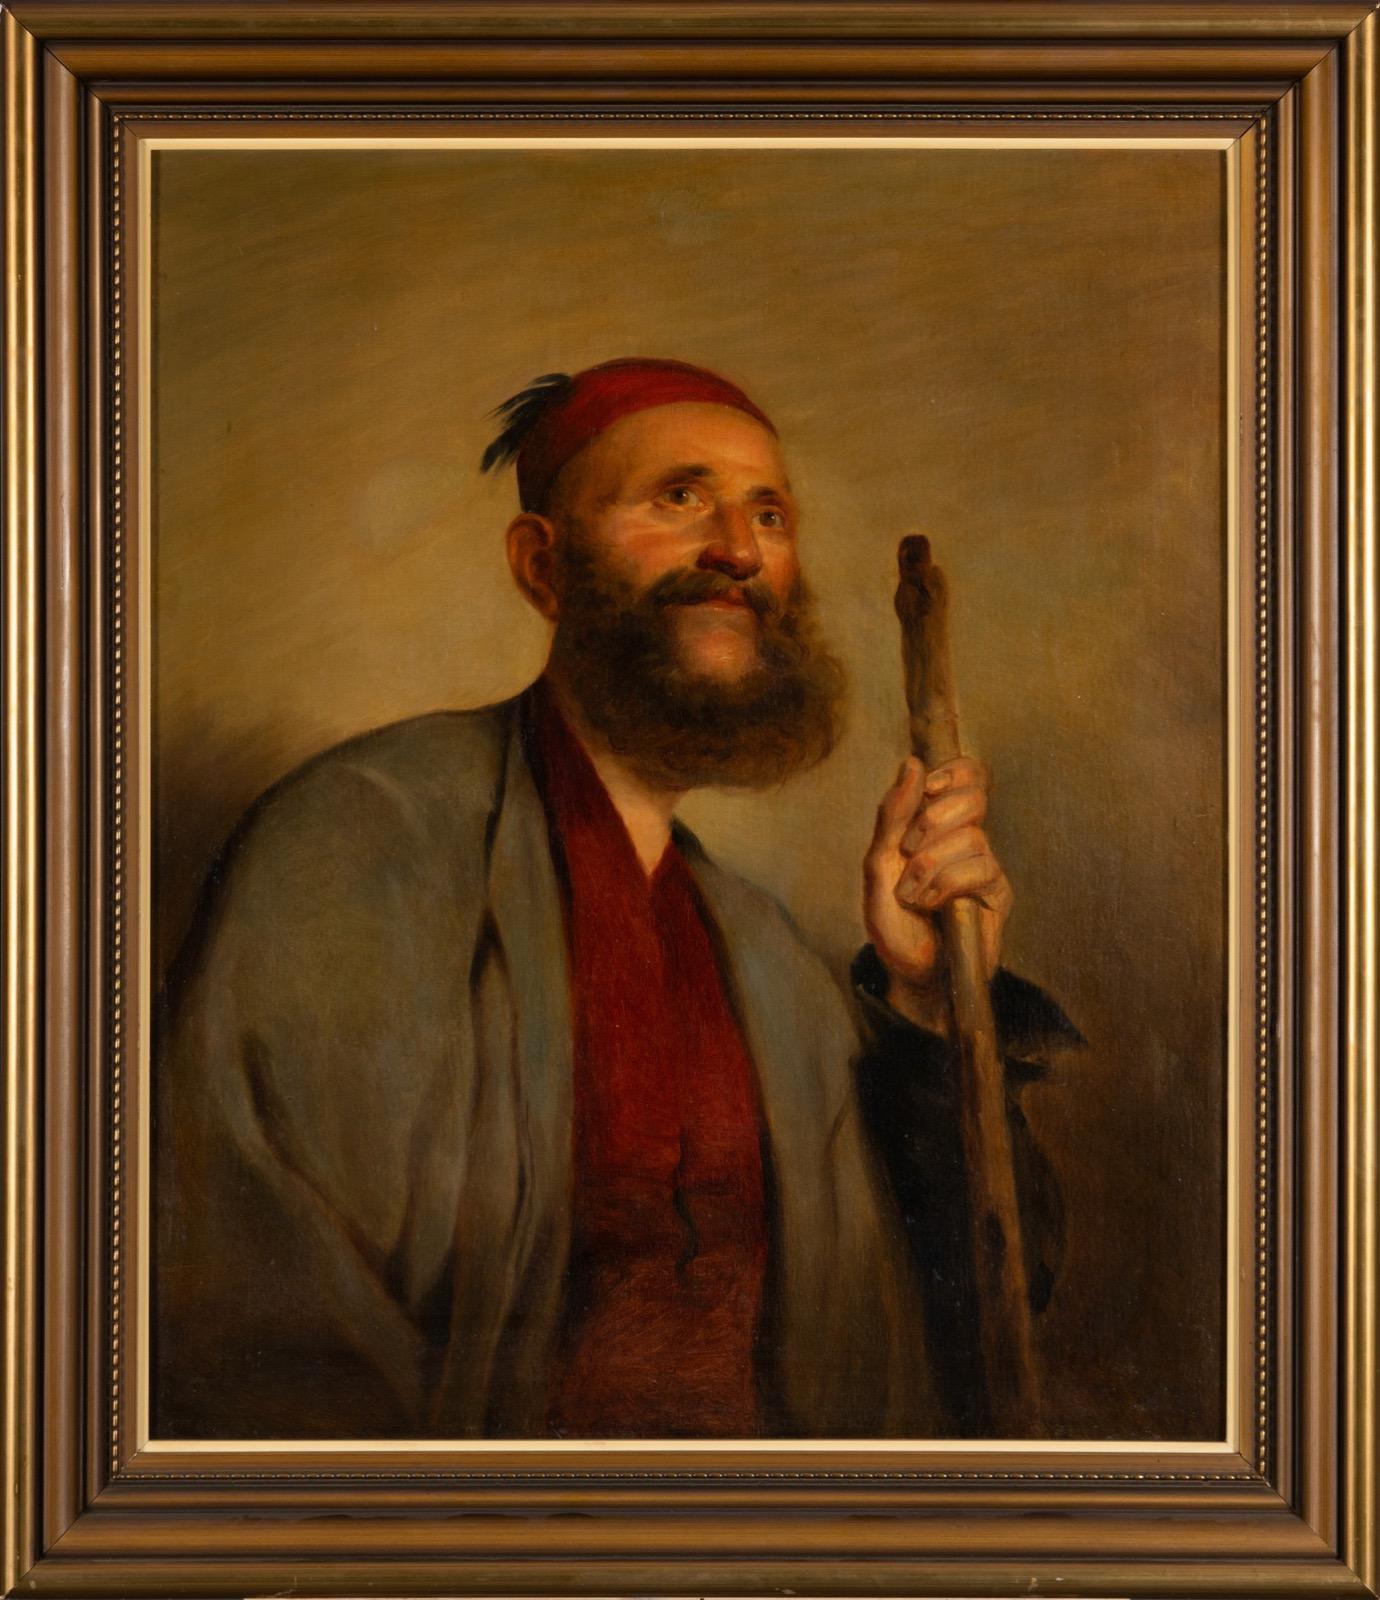 A fine portrait of an oriental bearded man, wearing a fez and holding a walking stick, second half of the 19th century. Oil on canvas. Relined. Unknown artist but probably Swedish. 

The fez is a felt headdress in the shape of a short, cylindrical,